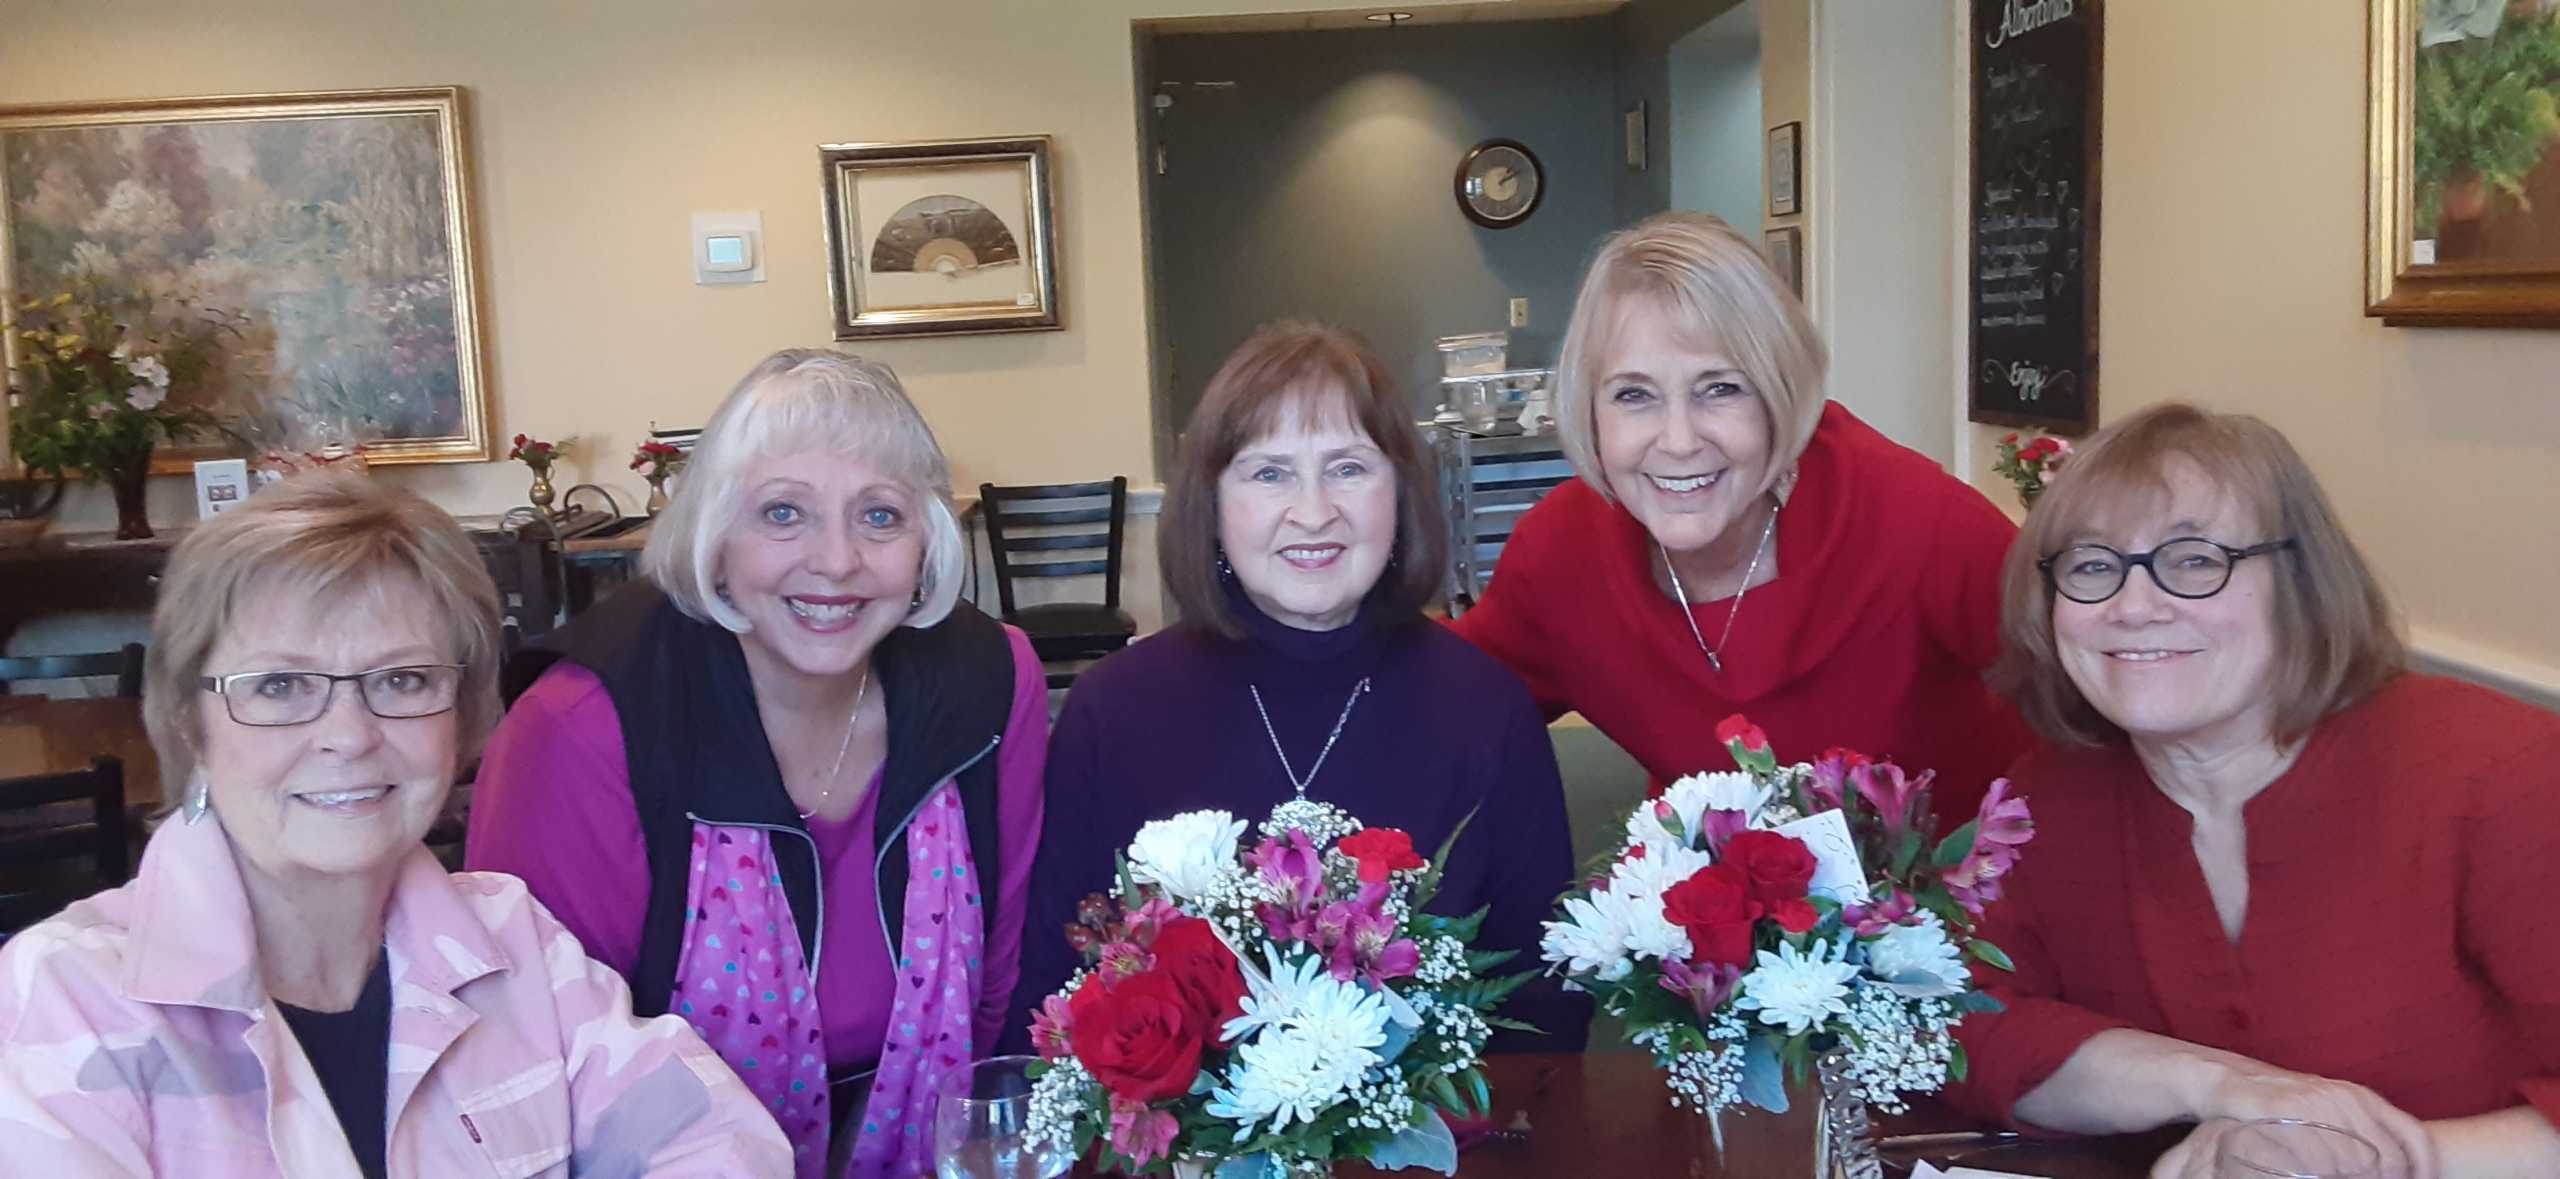 Karen Floyd (second from left) and Roe Ann Oberg (center) with past Lifetime Achievement honorees.